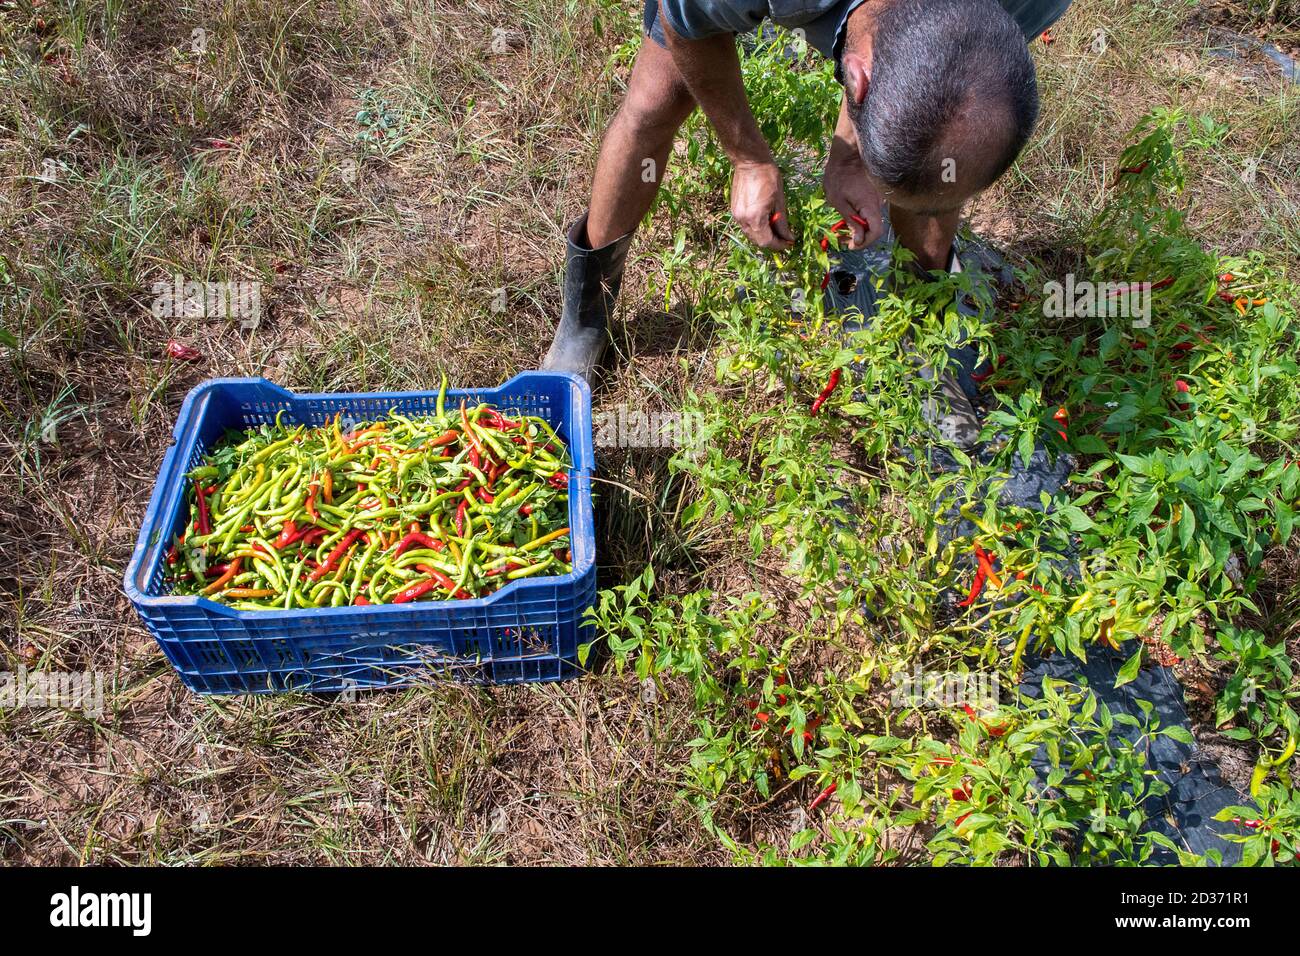 A man harvesting chilly peppers Stock Photo